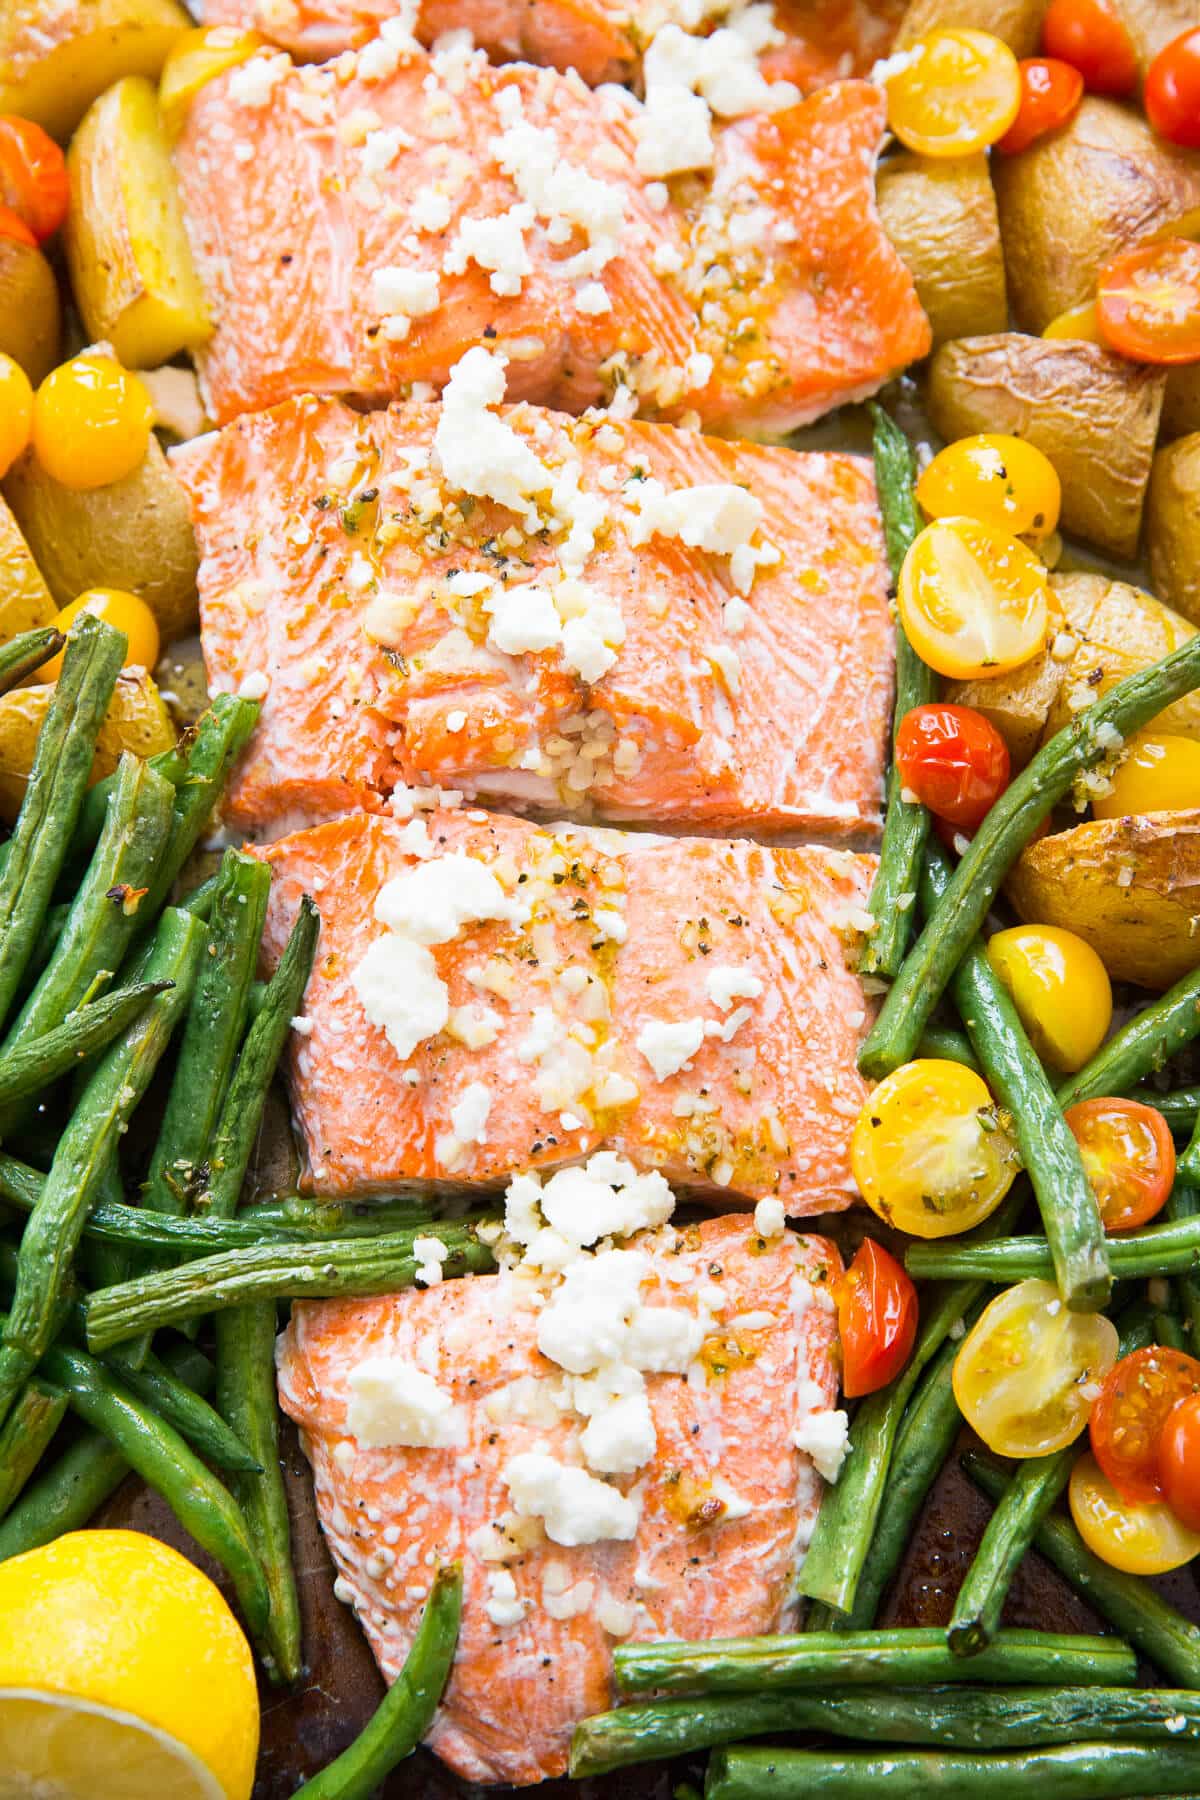 This Mediterranean salmon is baked simply with vegetables all in one sheet pan!